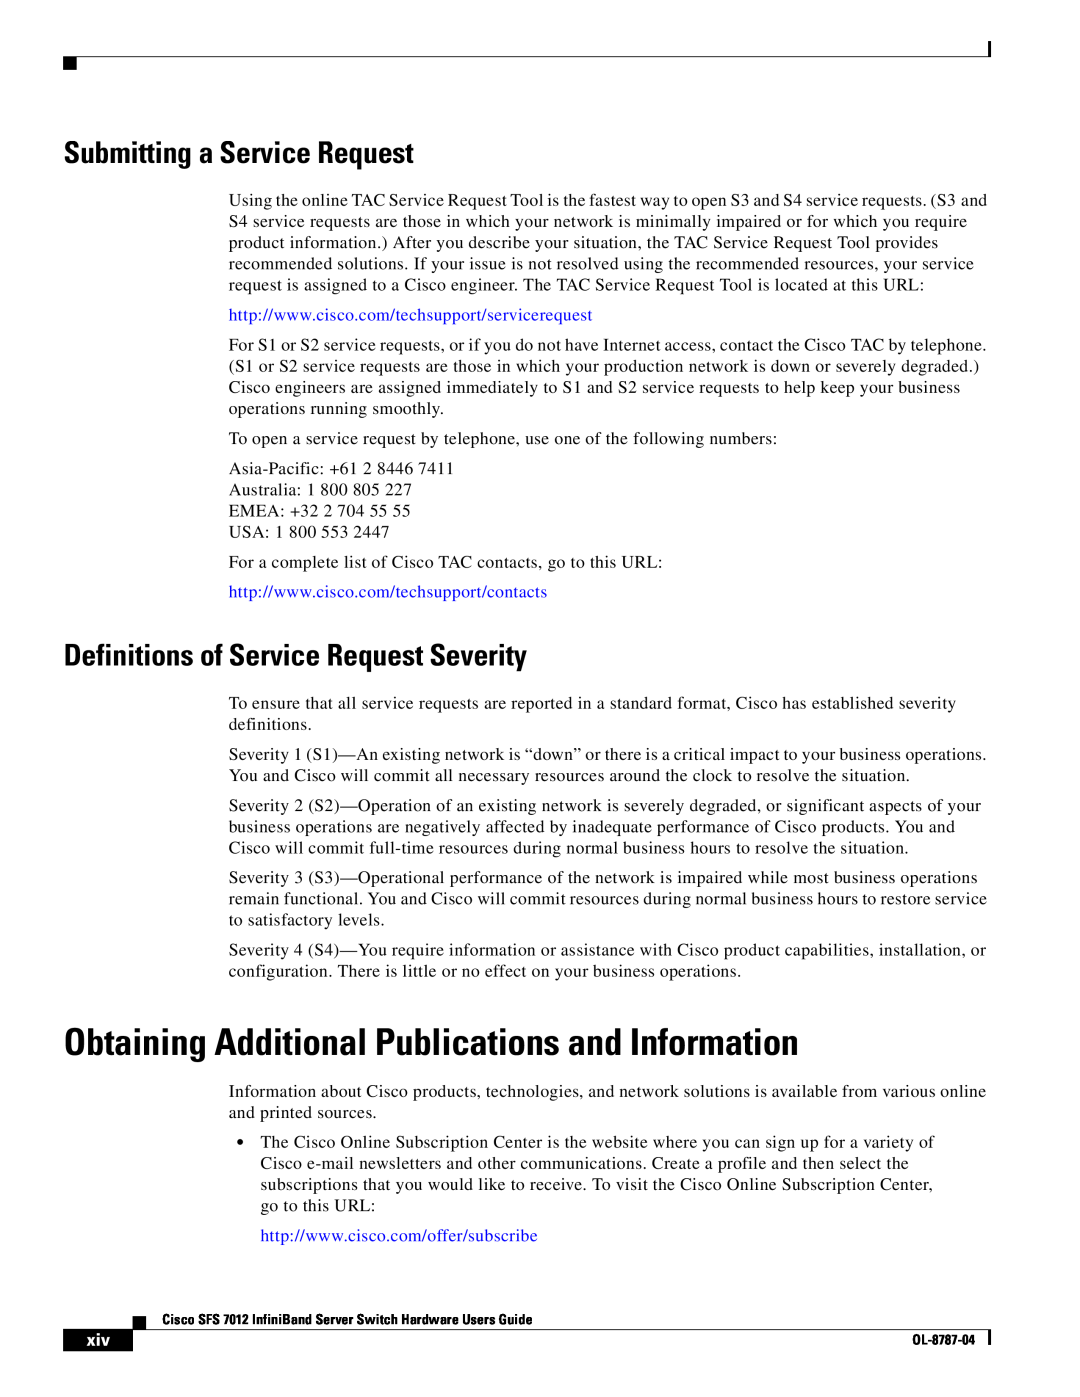 Cisco Systems SFS 7012 manual Obtaining Additional Publications and Information, Submitting a Service Request 